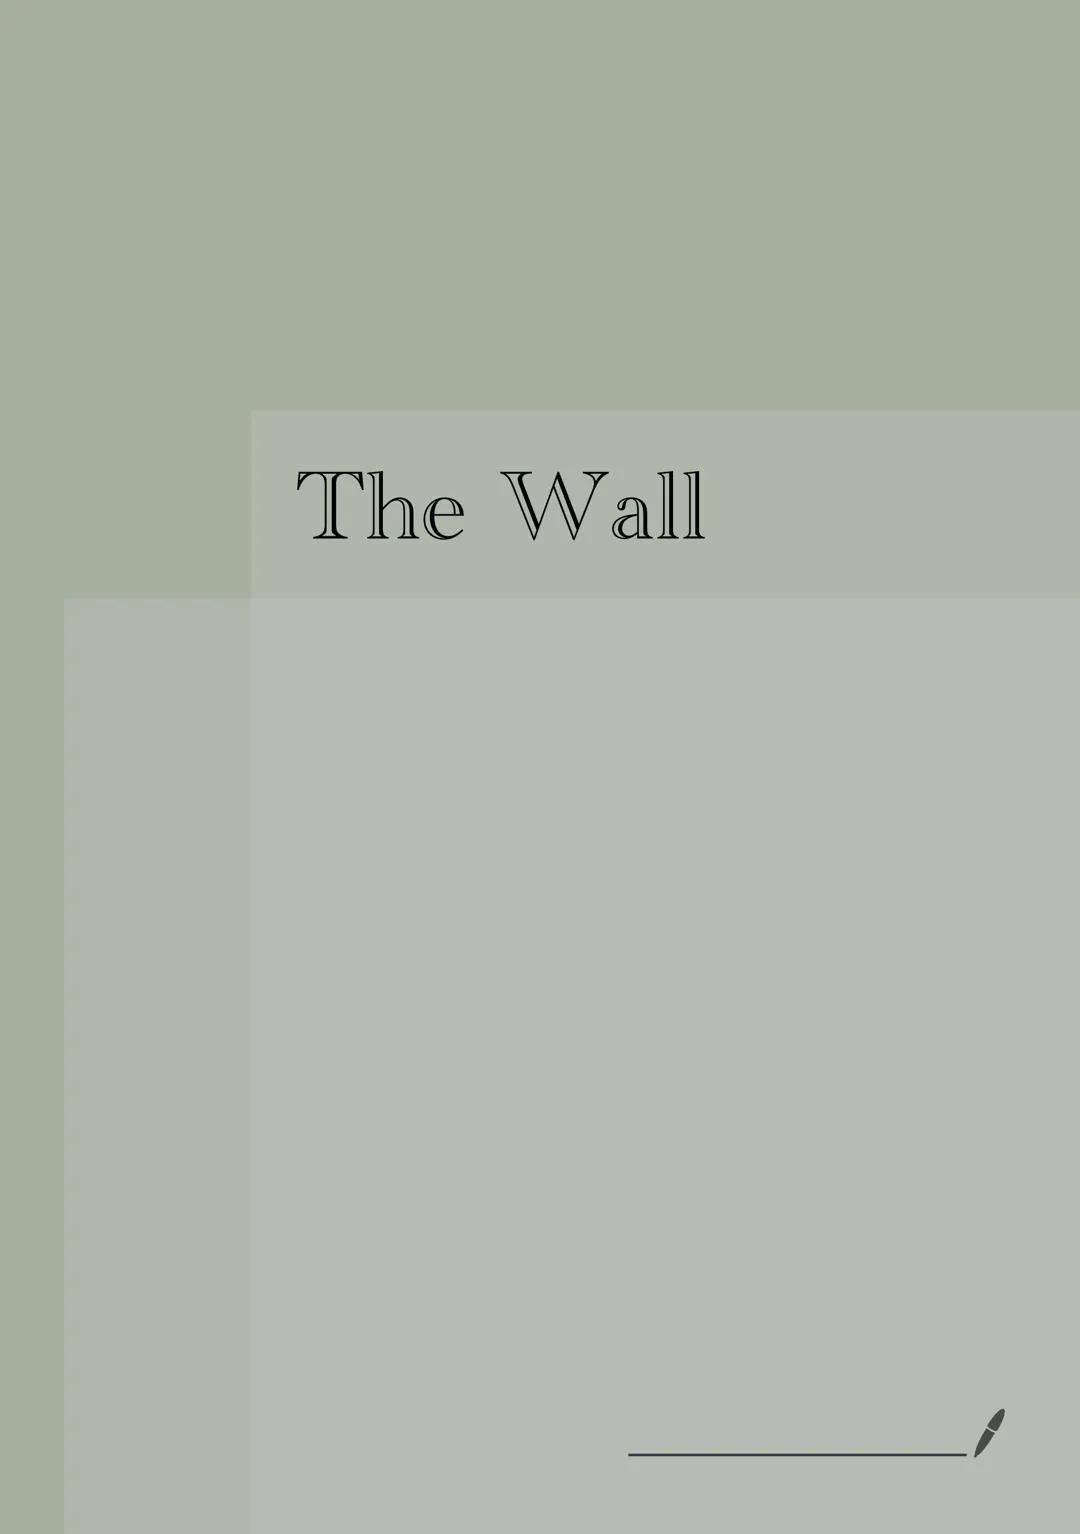 The Wall 2. Englisch klausur
Dystopia
·an imaginary place where life is extremely difficult and a lot of unfair or immoral
things happen
a s